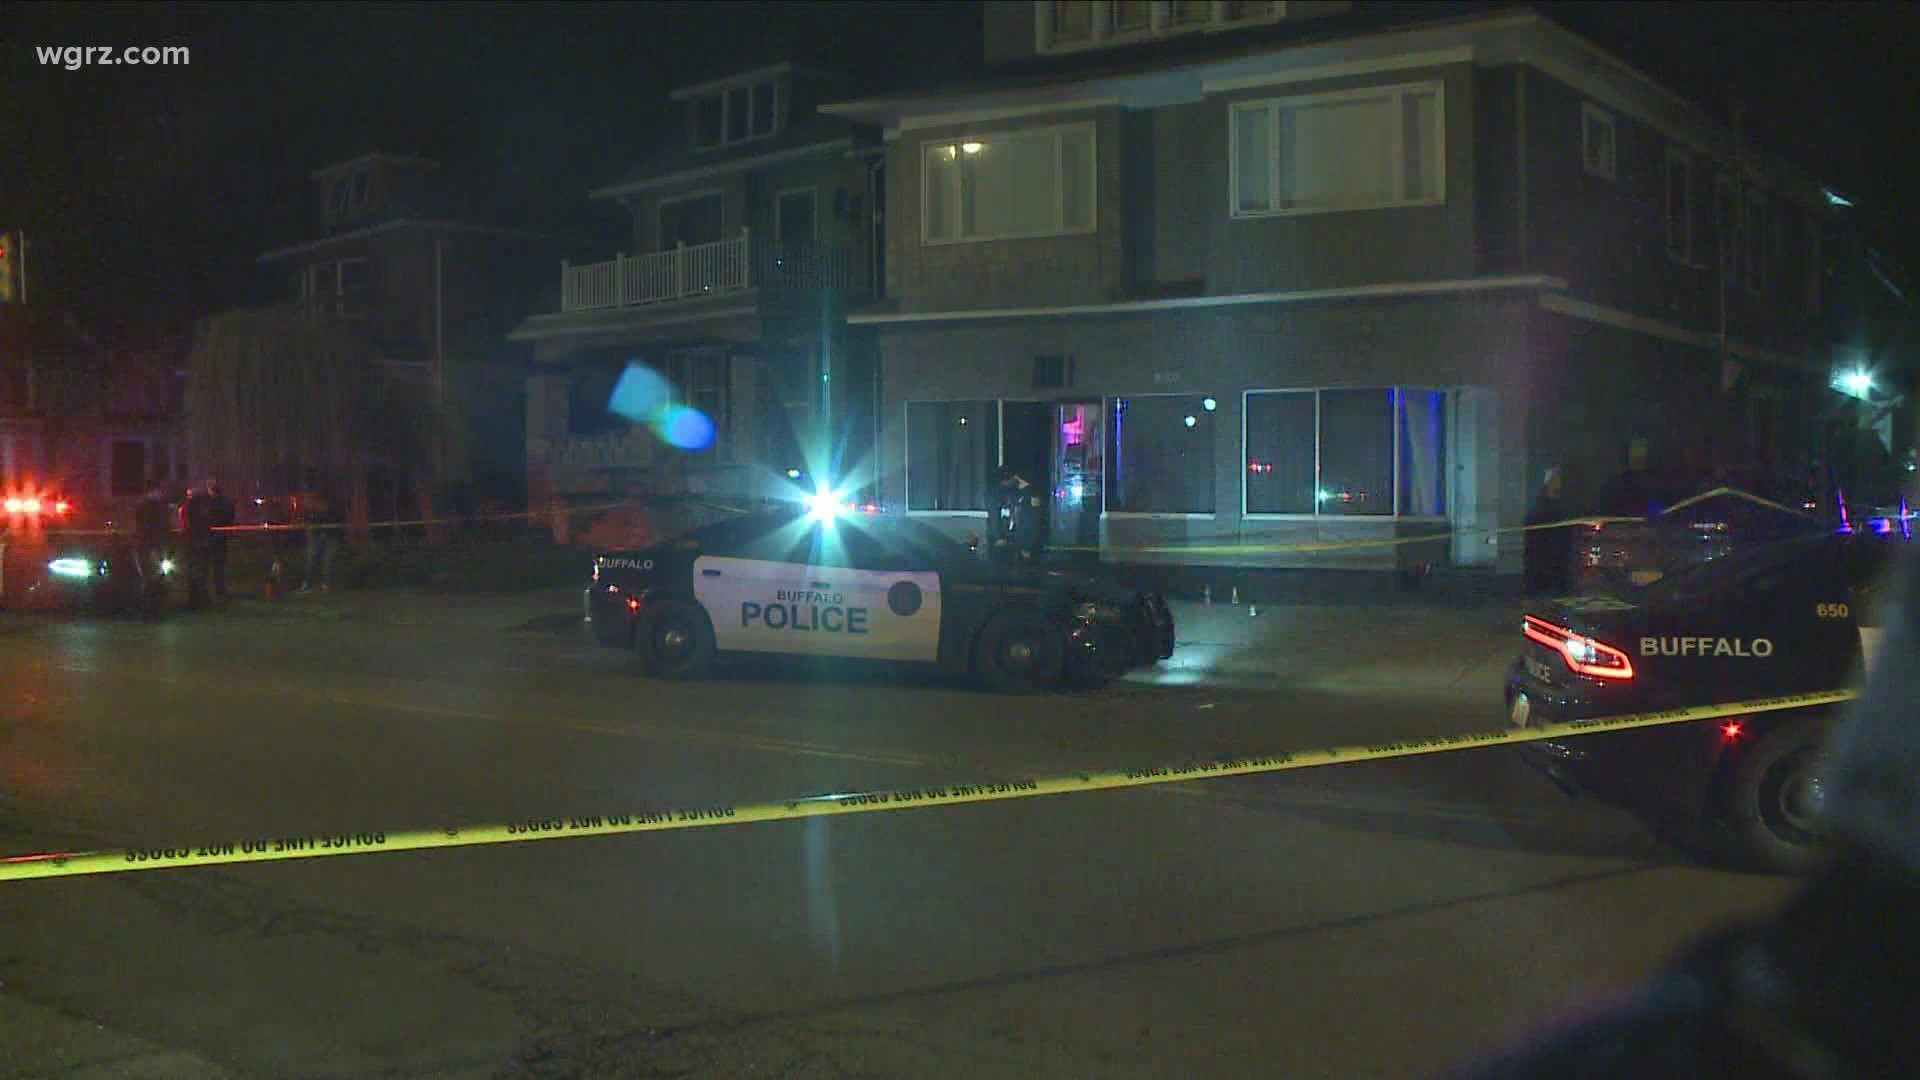 Investigators say two people were shot around 1:15 on Walden Avenue during a large gathering.
A 20-year-old man was later declared dead at ECMC...